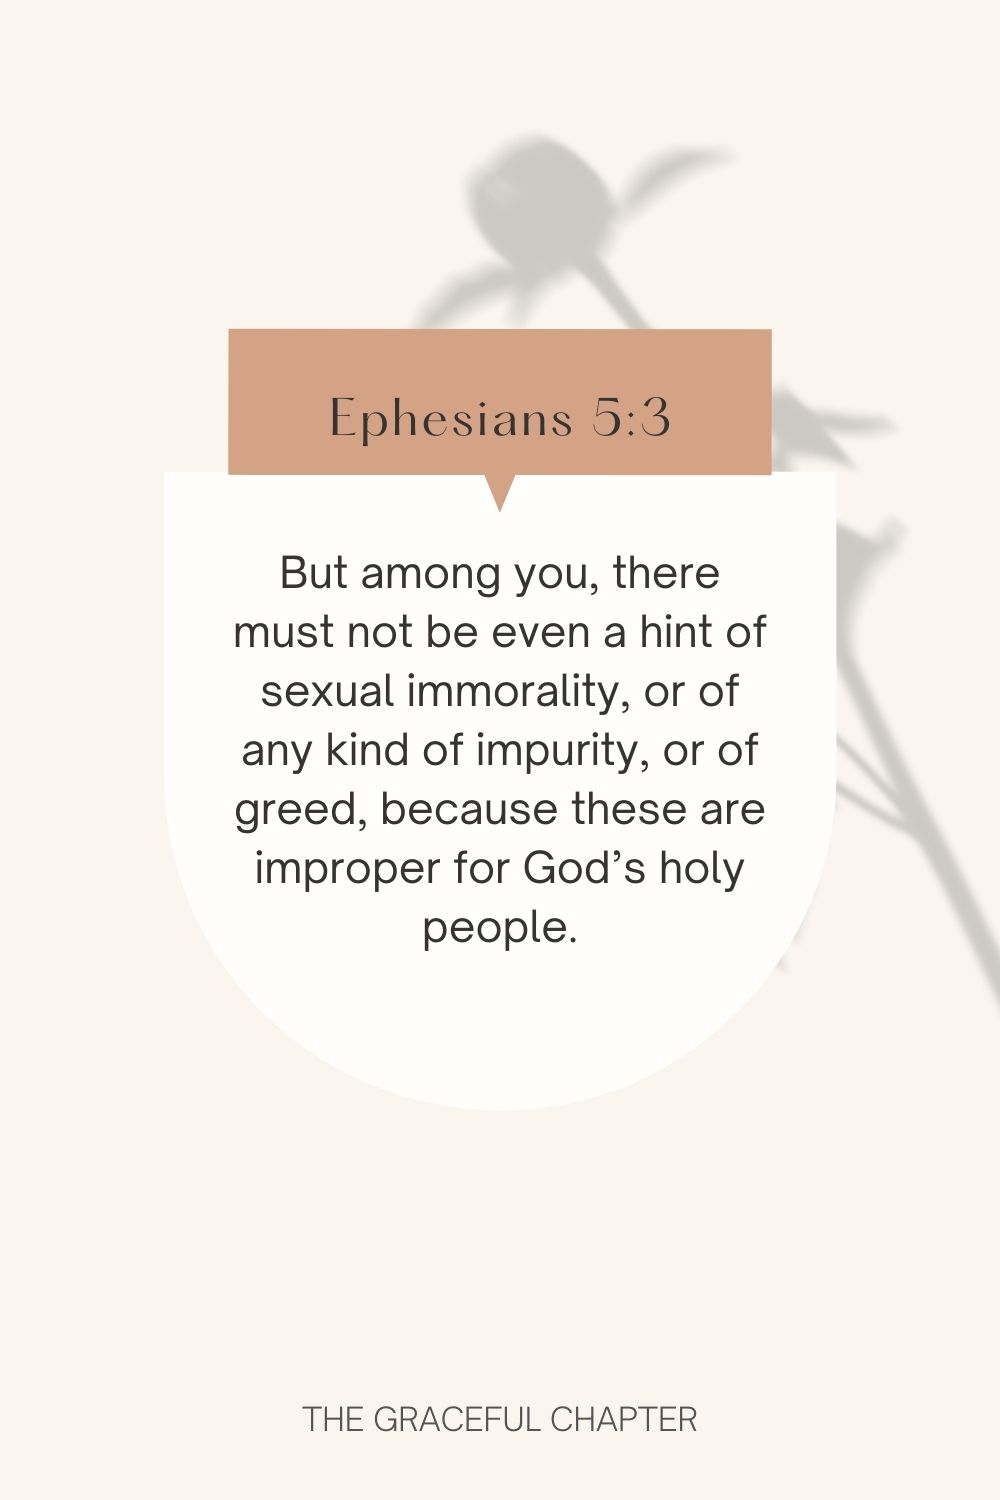 But among you, there must not be even a hint of sexual immorality, or of any kind of impurity, or of greed, because these are improper for God’s holy people. Ephesians 5:3